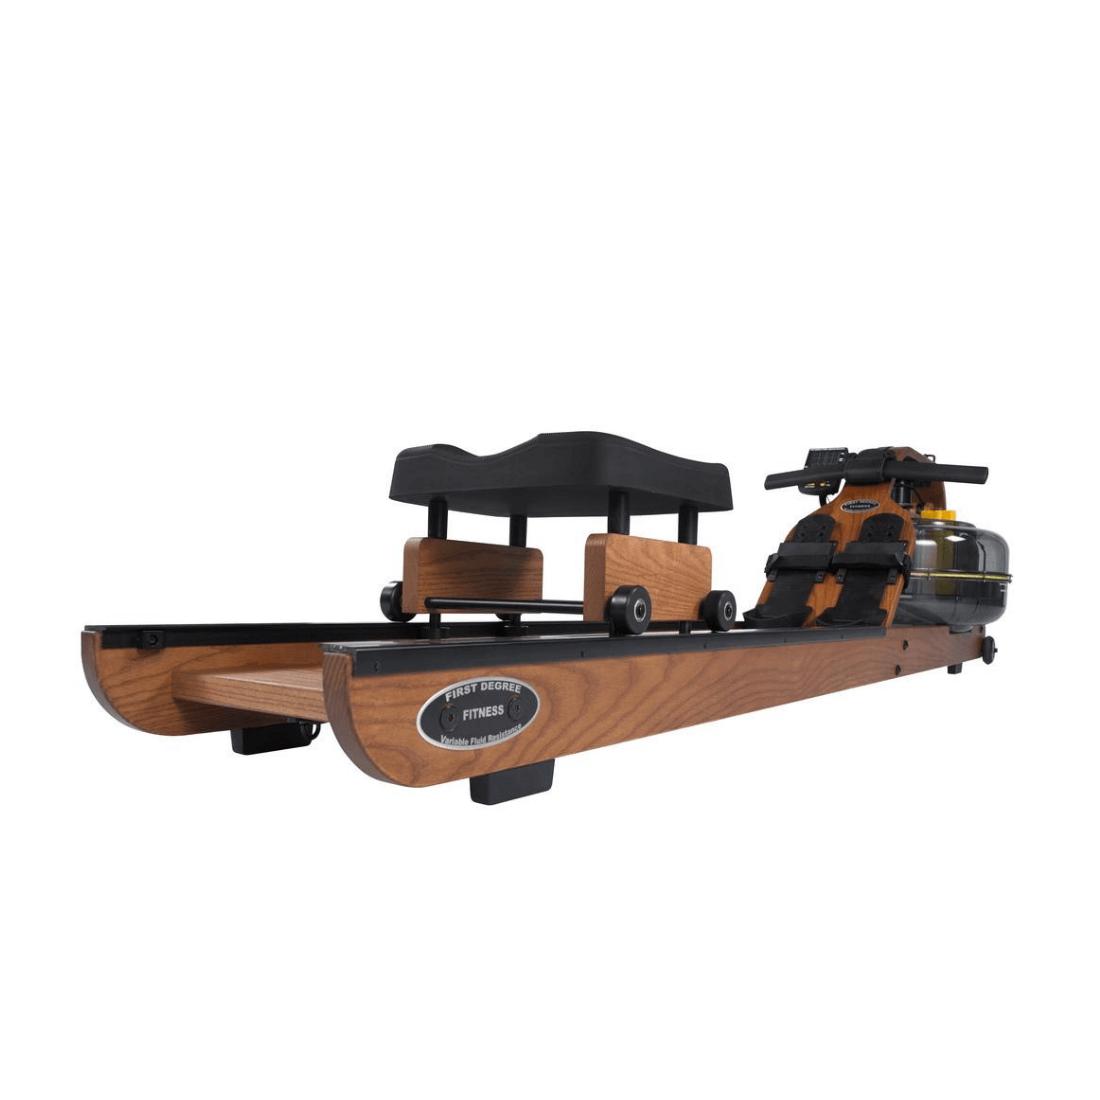 First Degree Fitness Viking 3 AR PLUS Indoor Water Rower-2